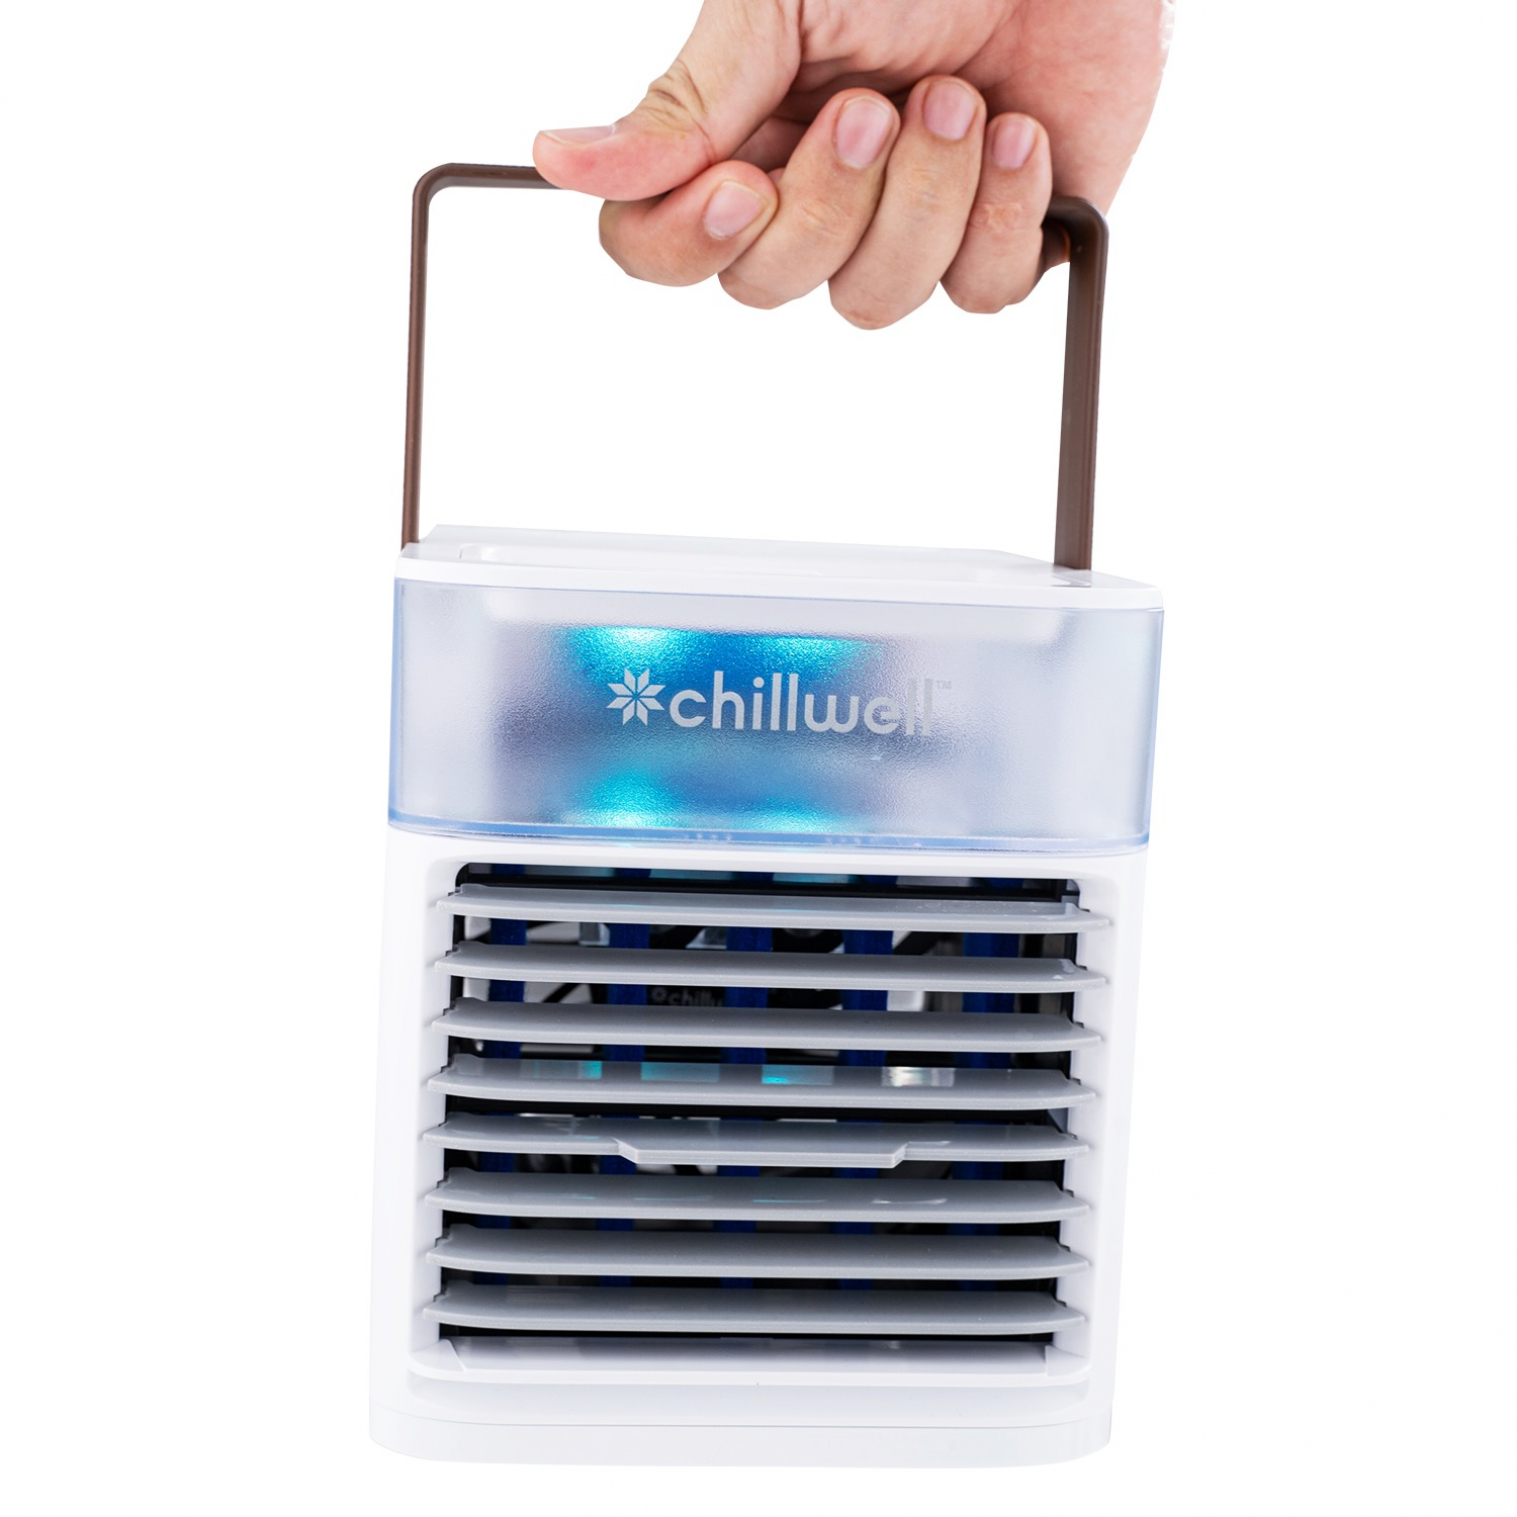 Pure Chill Chillwell Ac Reviews